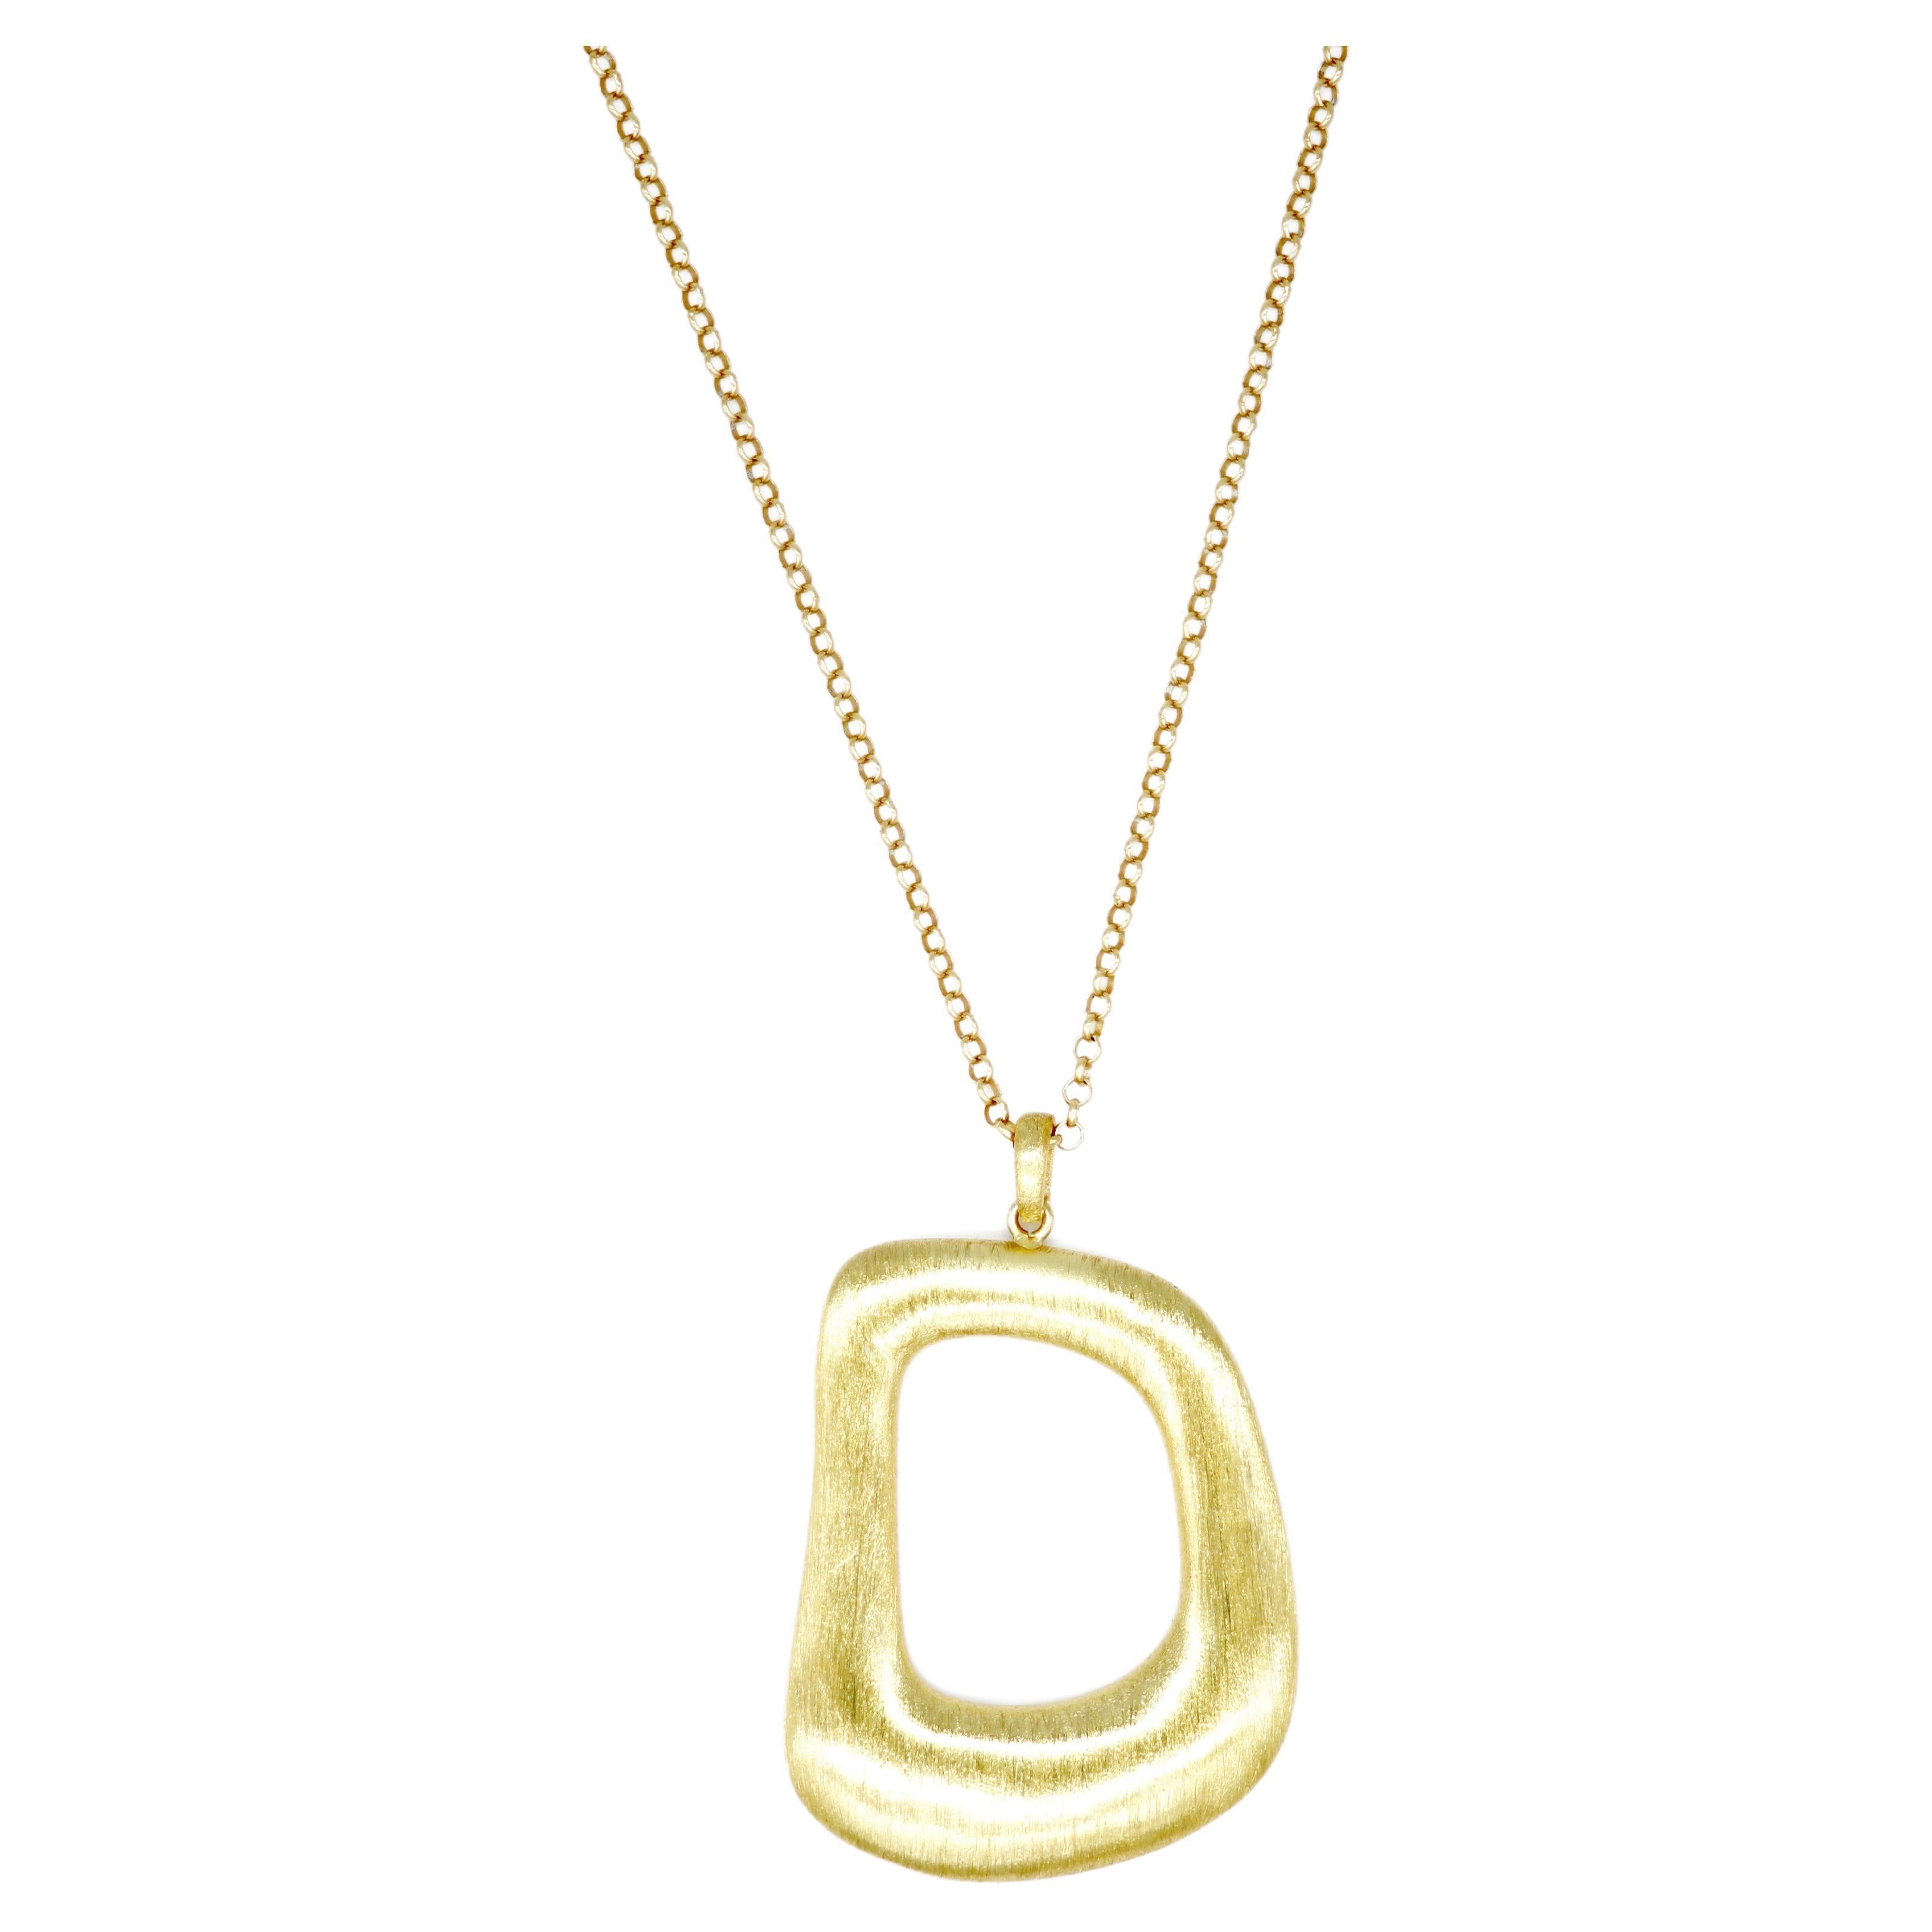 Pendant necklace, 925 sterling silver, 18 kt. gold plated, Amanda For Sale